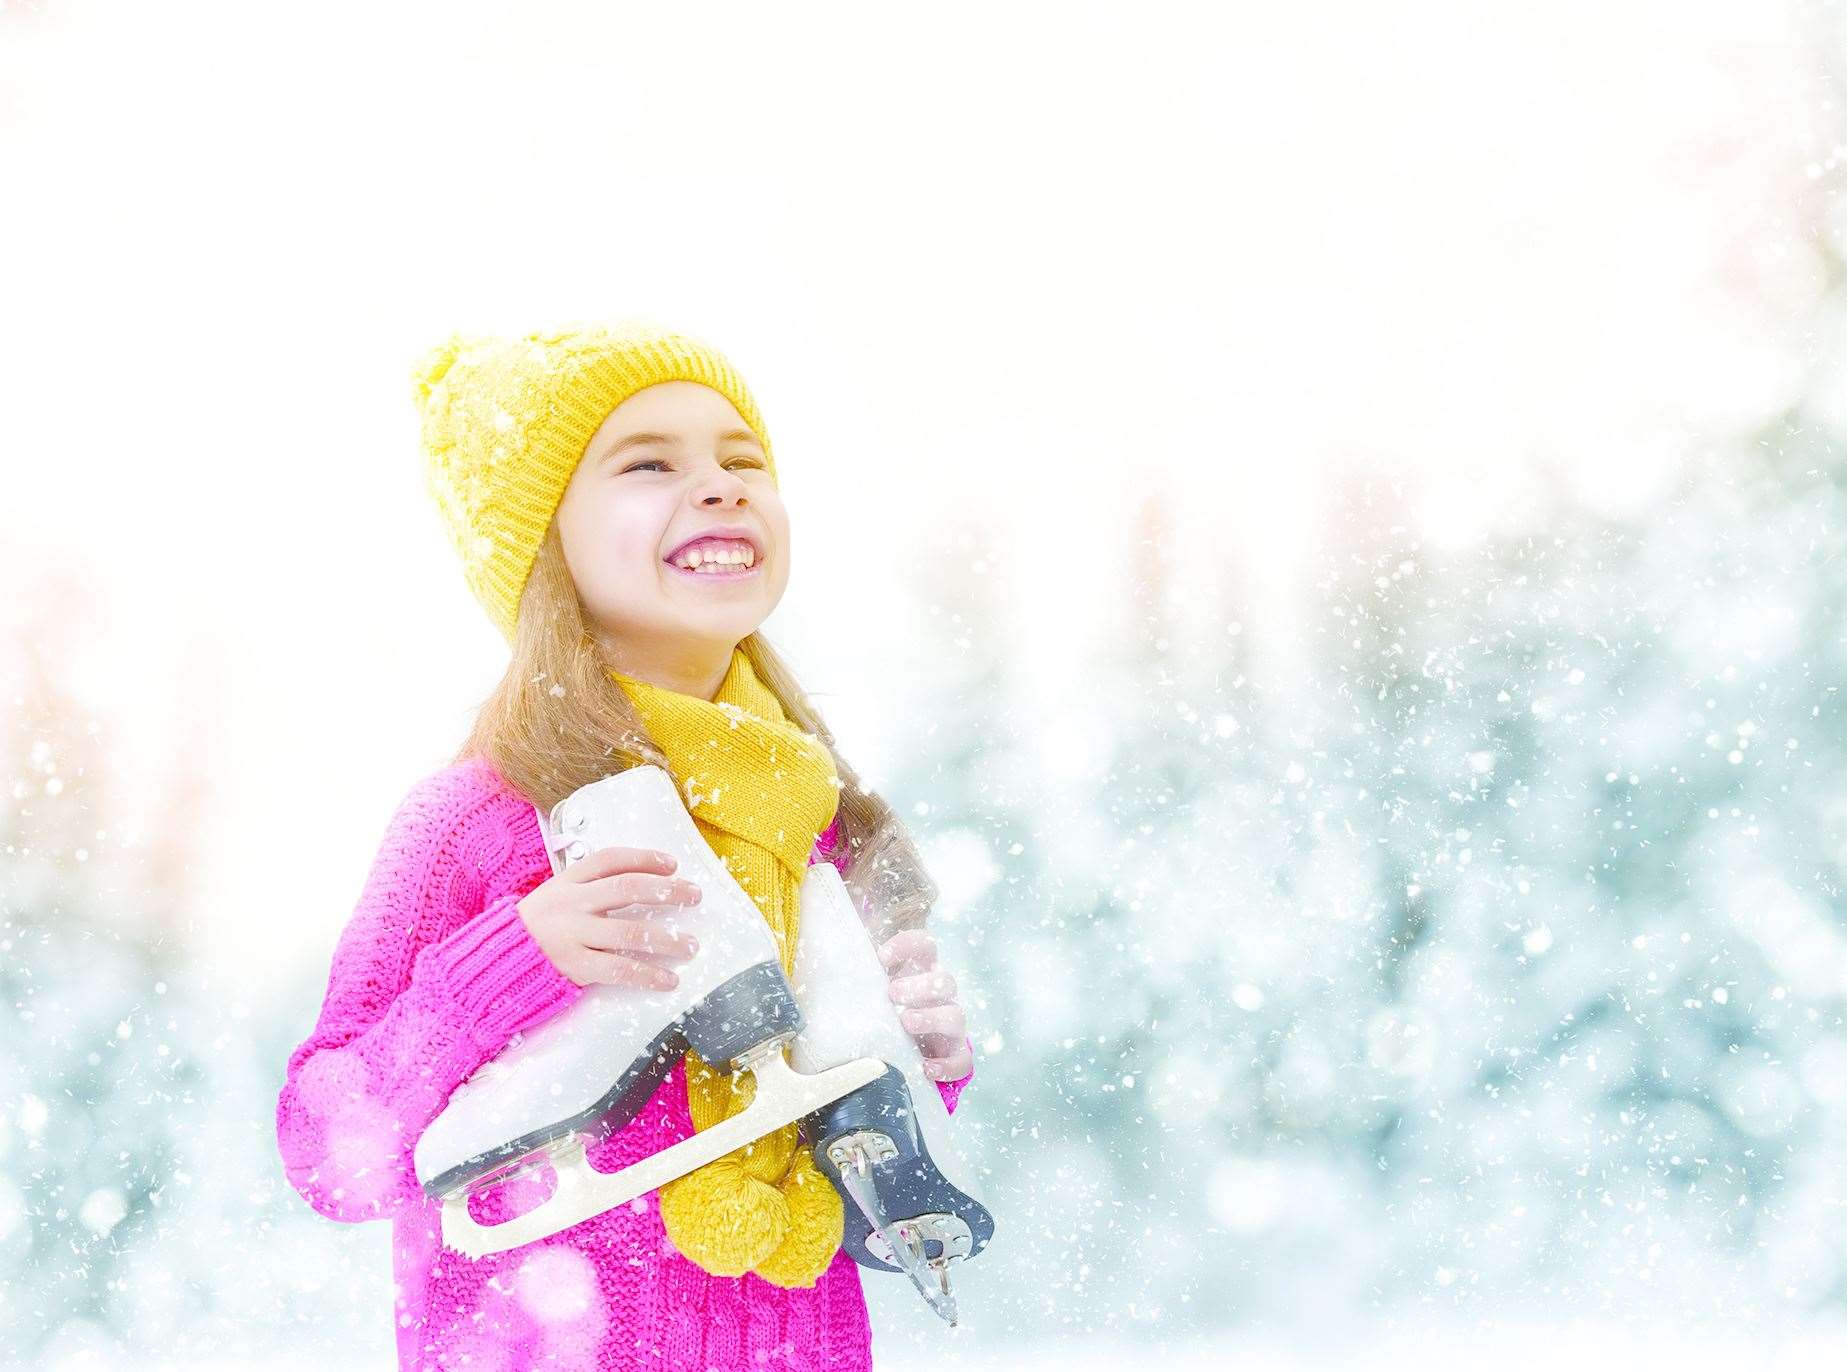 Do you dream of waking up to snow on Christmas morning? Picture: iStock.